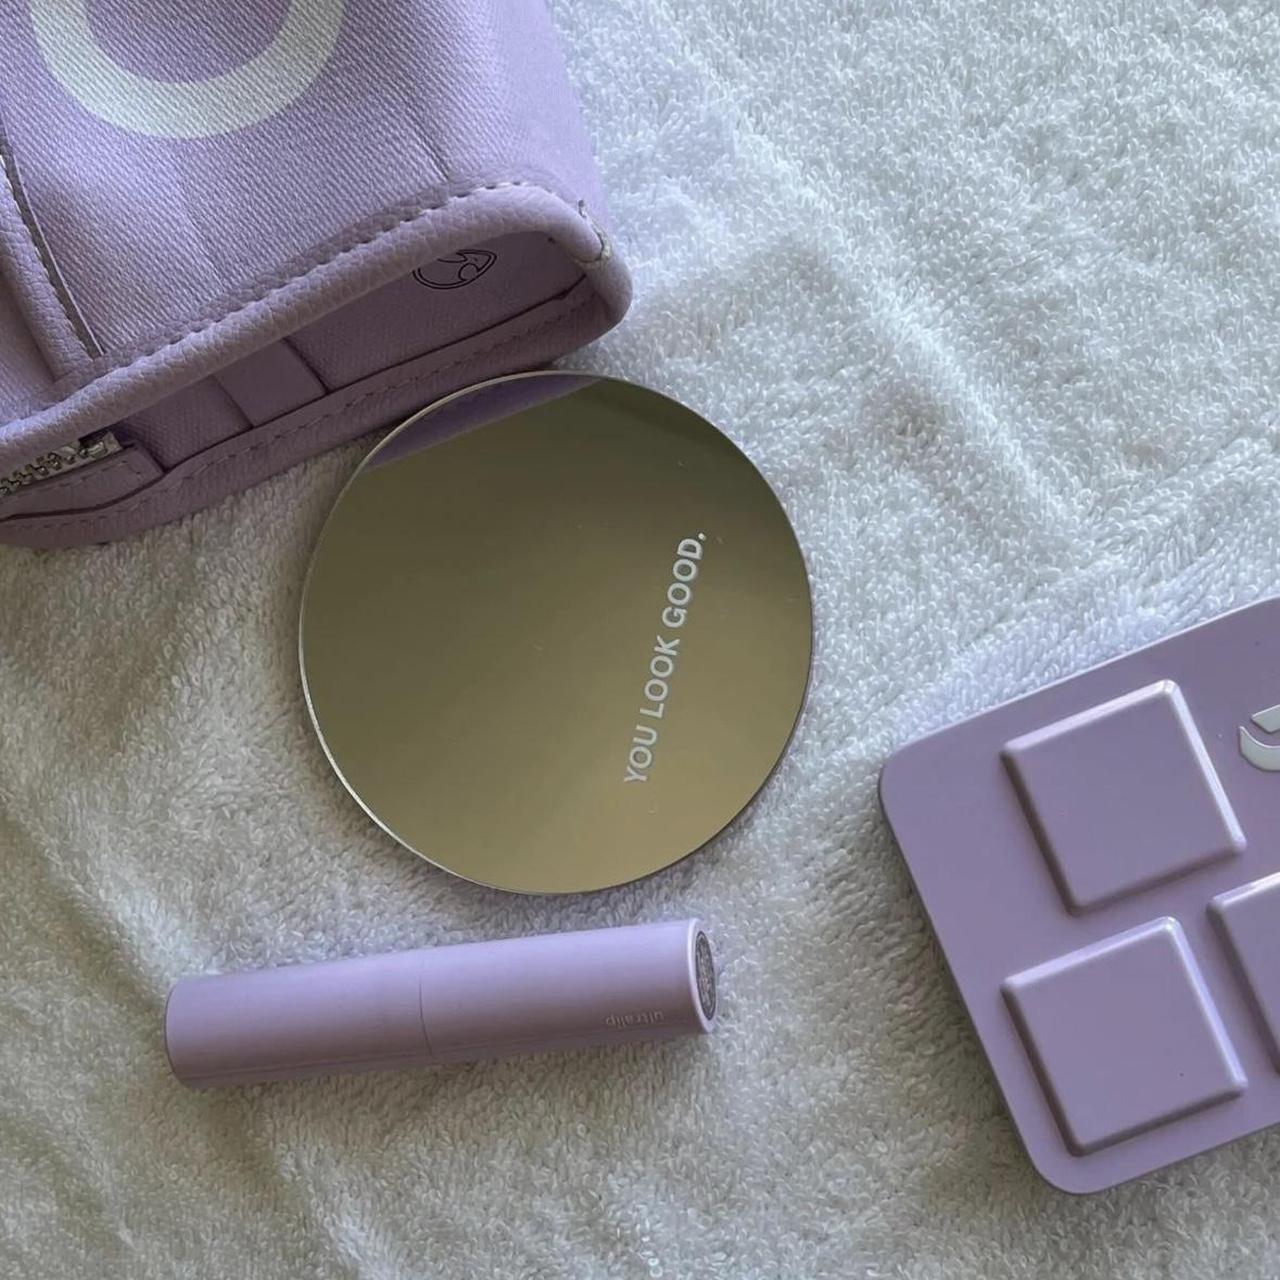 Olivia x Glossier makeup bag for those who don't want to go